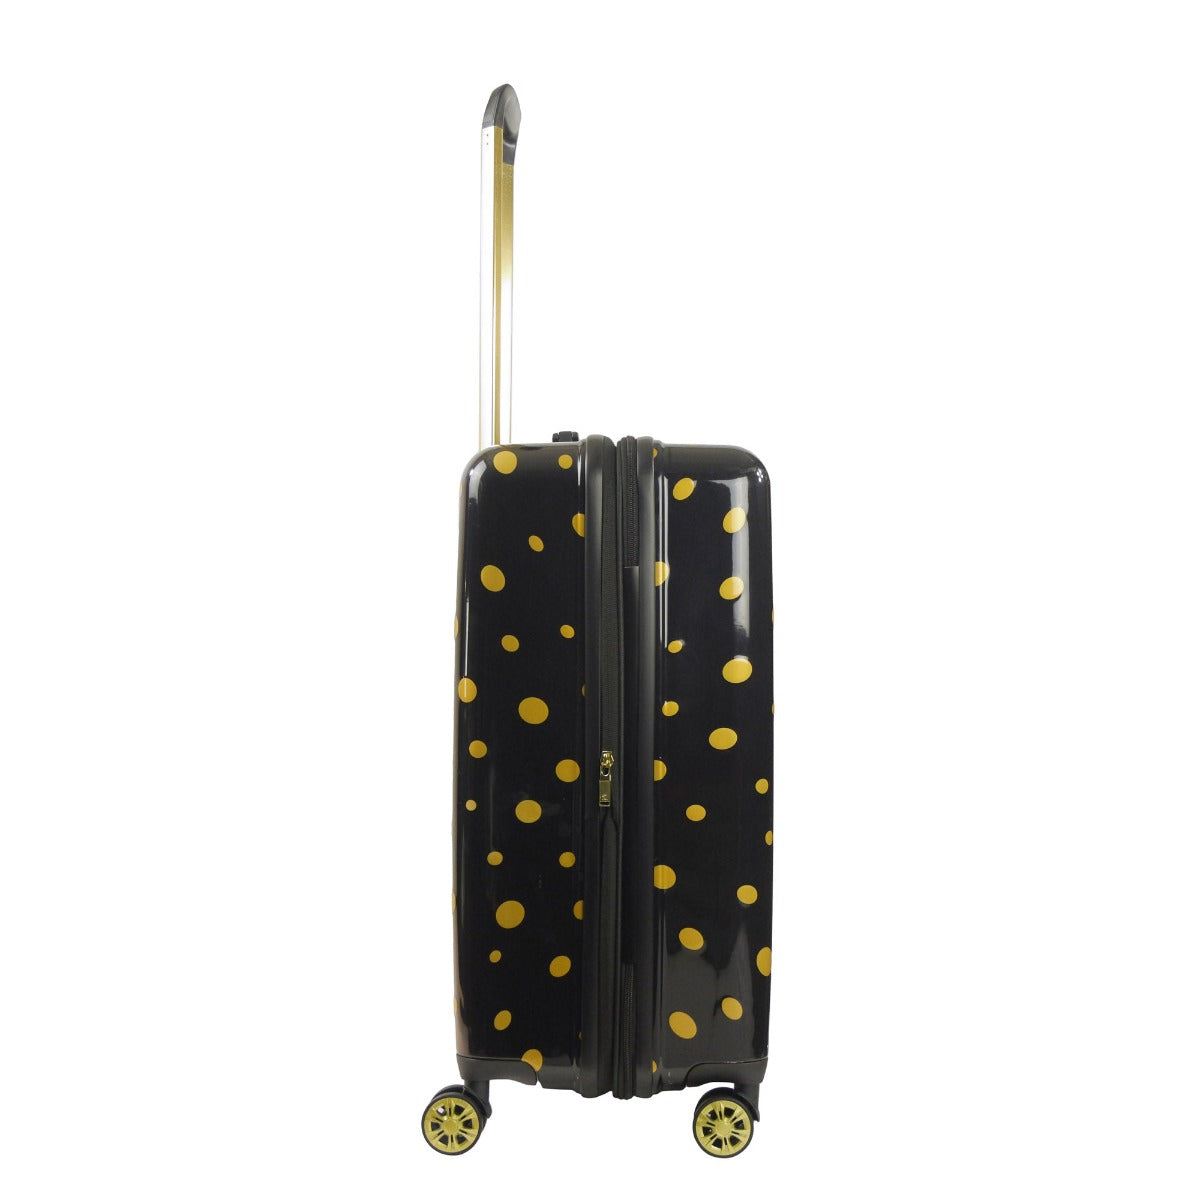 Ful Impulse Mixed Dots hardside spinner 26 inch checked luggage black gold suitcase